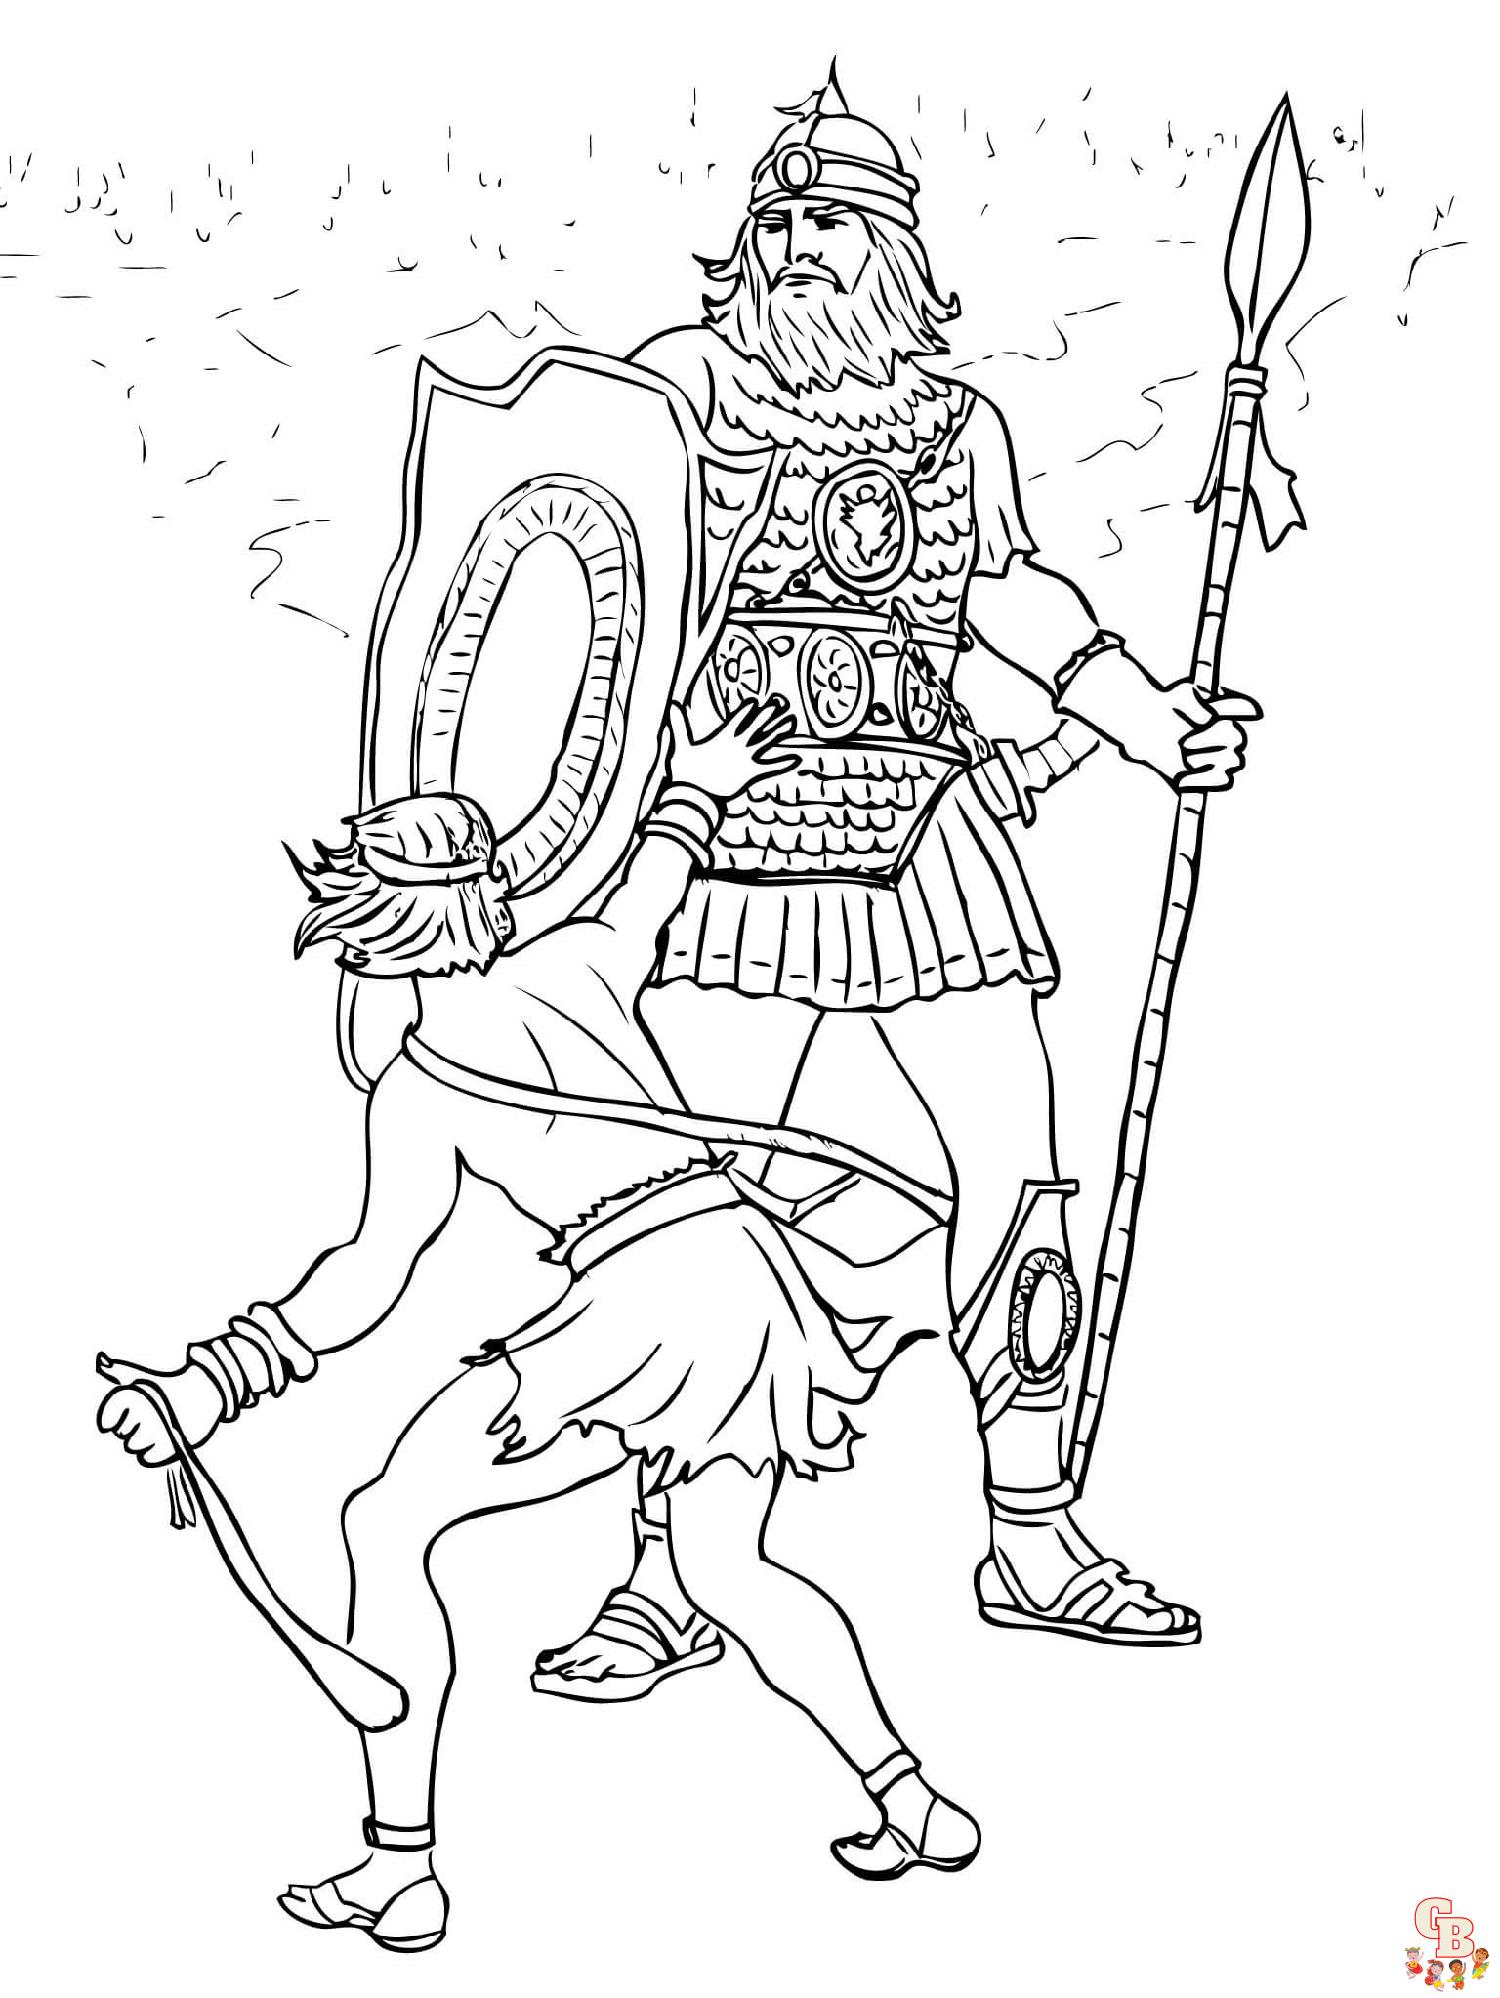 David and Goliath Coloring Pages 12